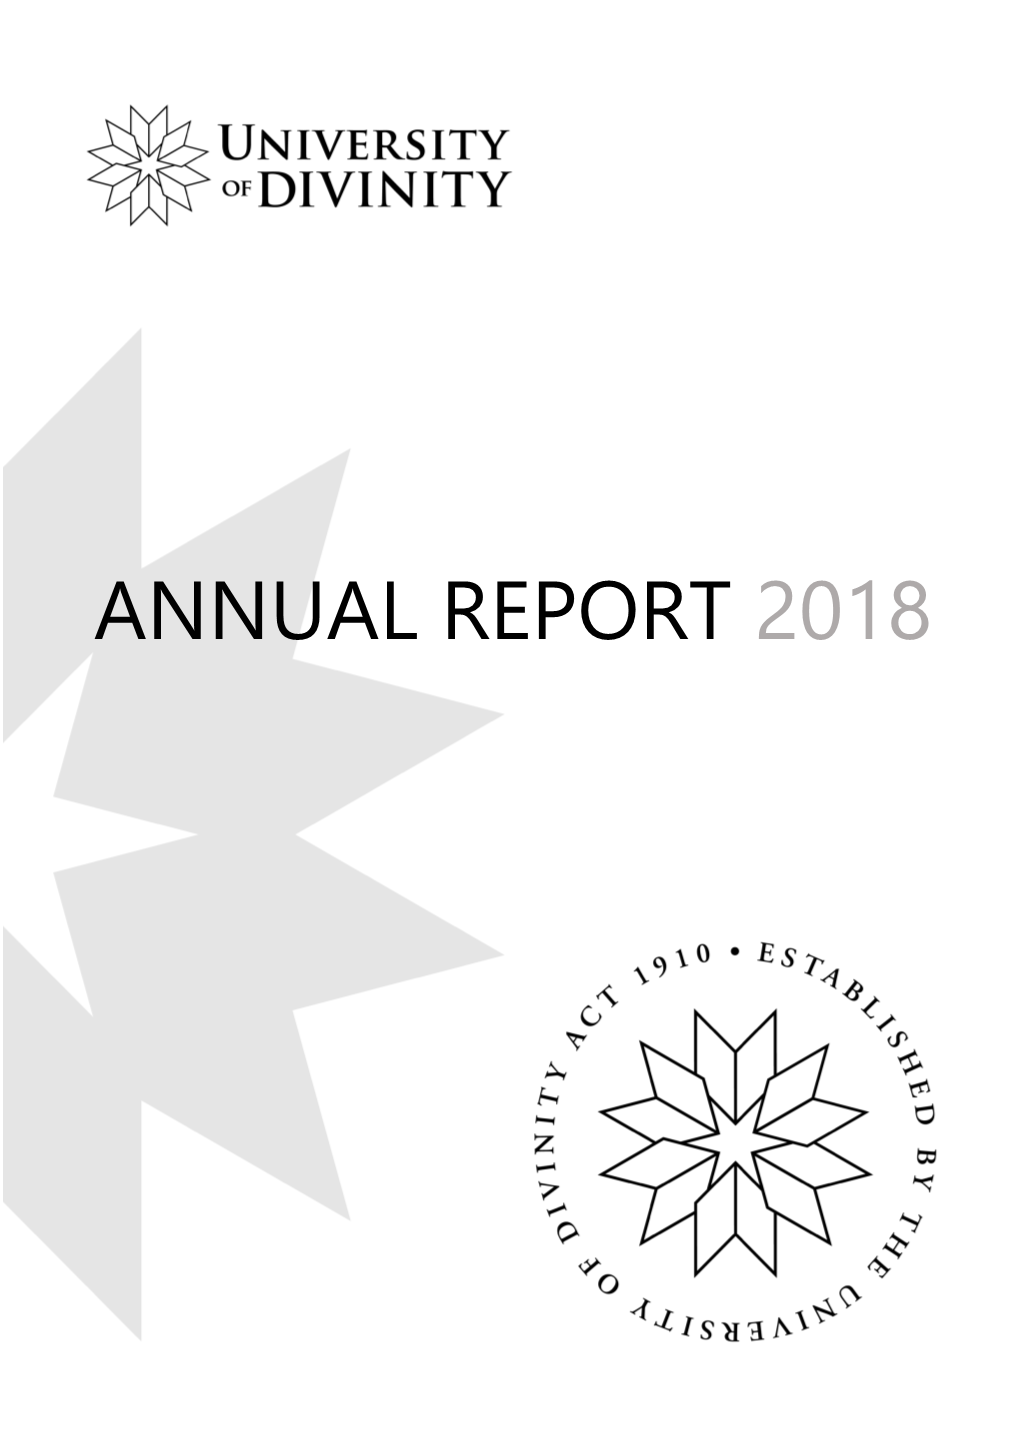 UNIVERSITY of DIVINITY Annual Report for the Year Ended 31 December 2018